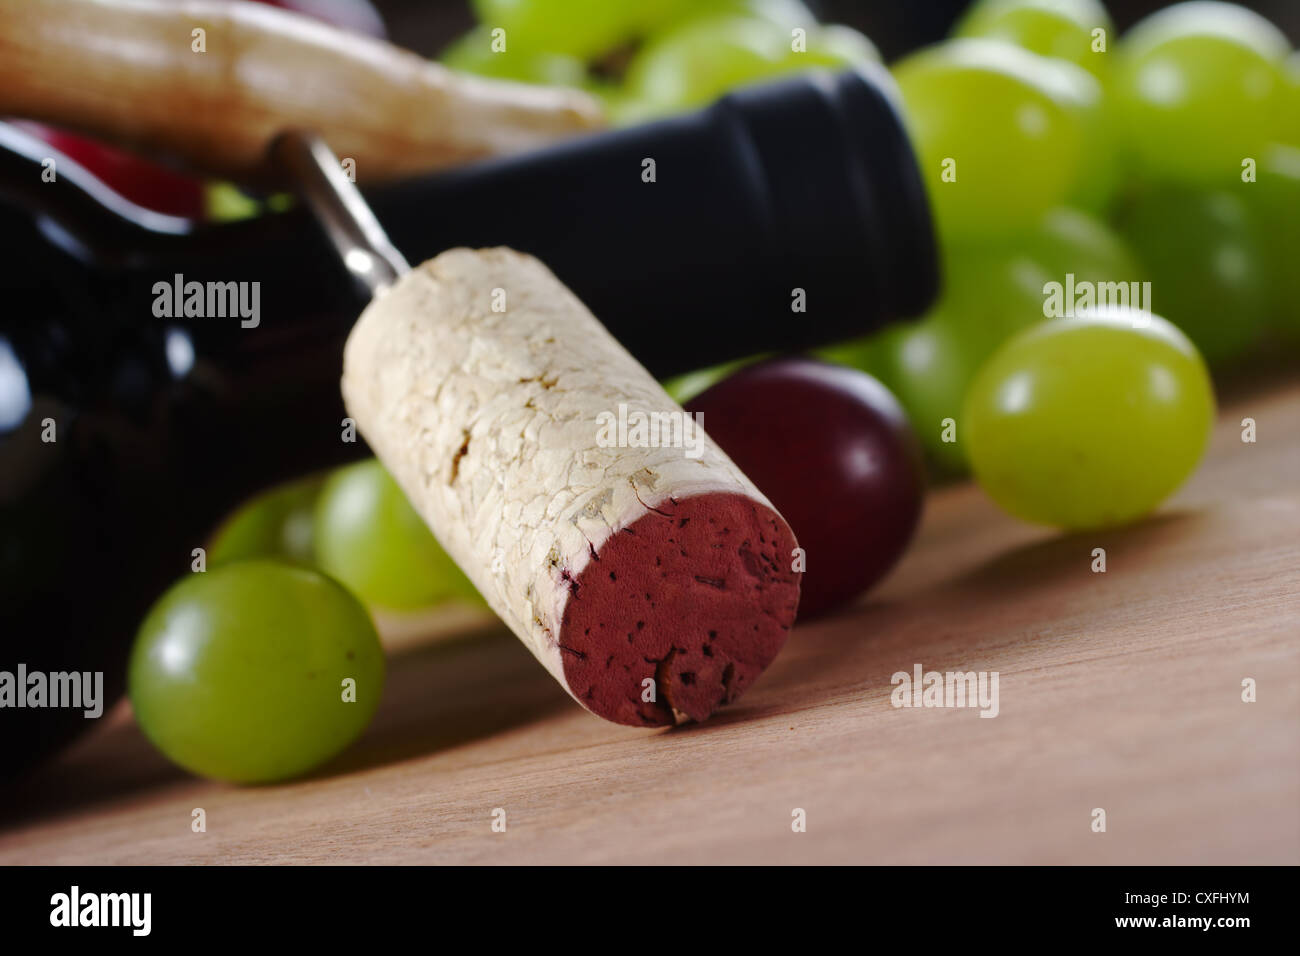 Cork on corkscrew leaning against a wine bottle surrounded by grapes Stock Photo